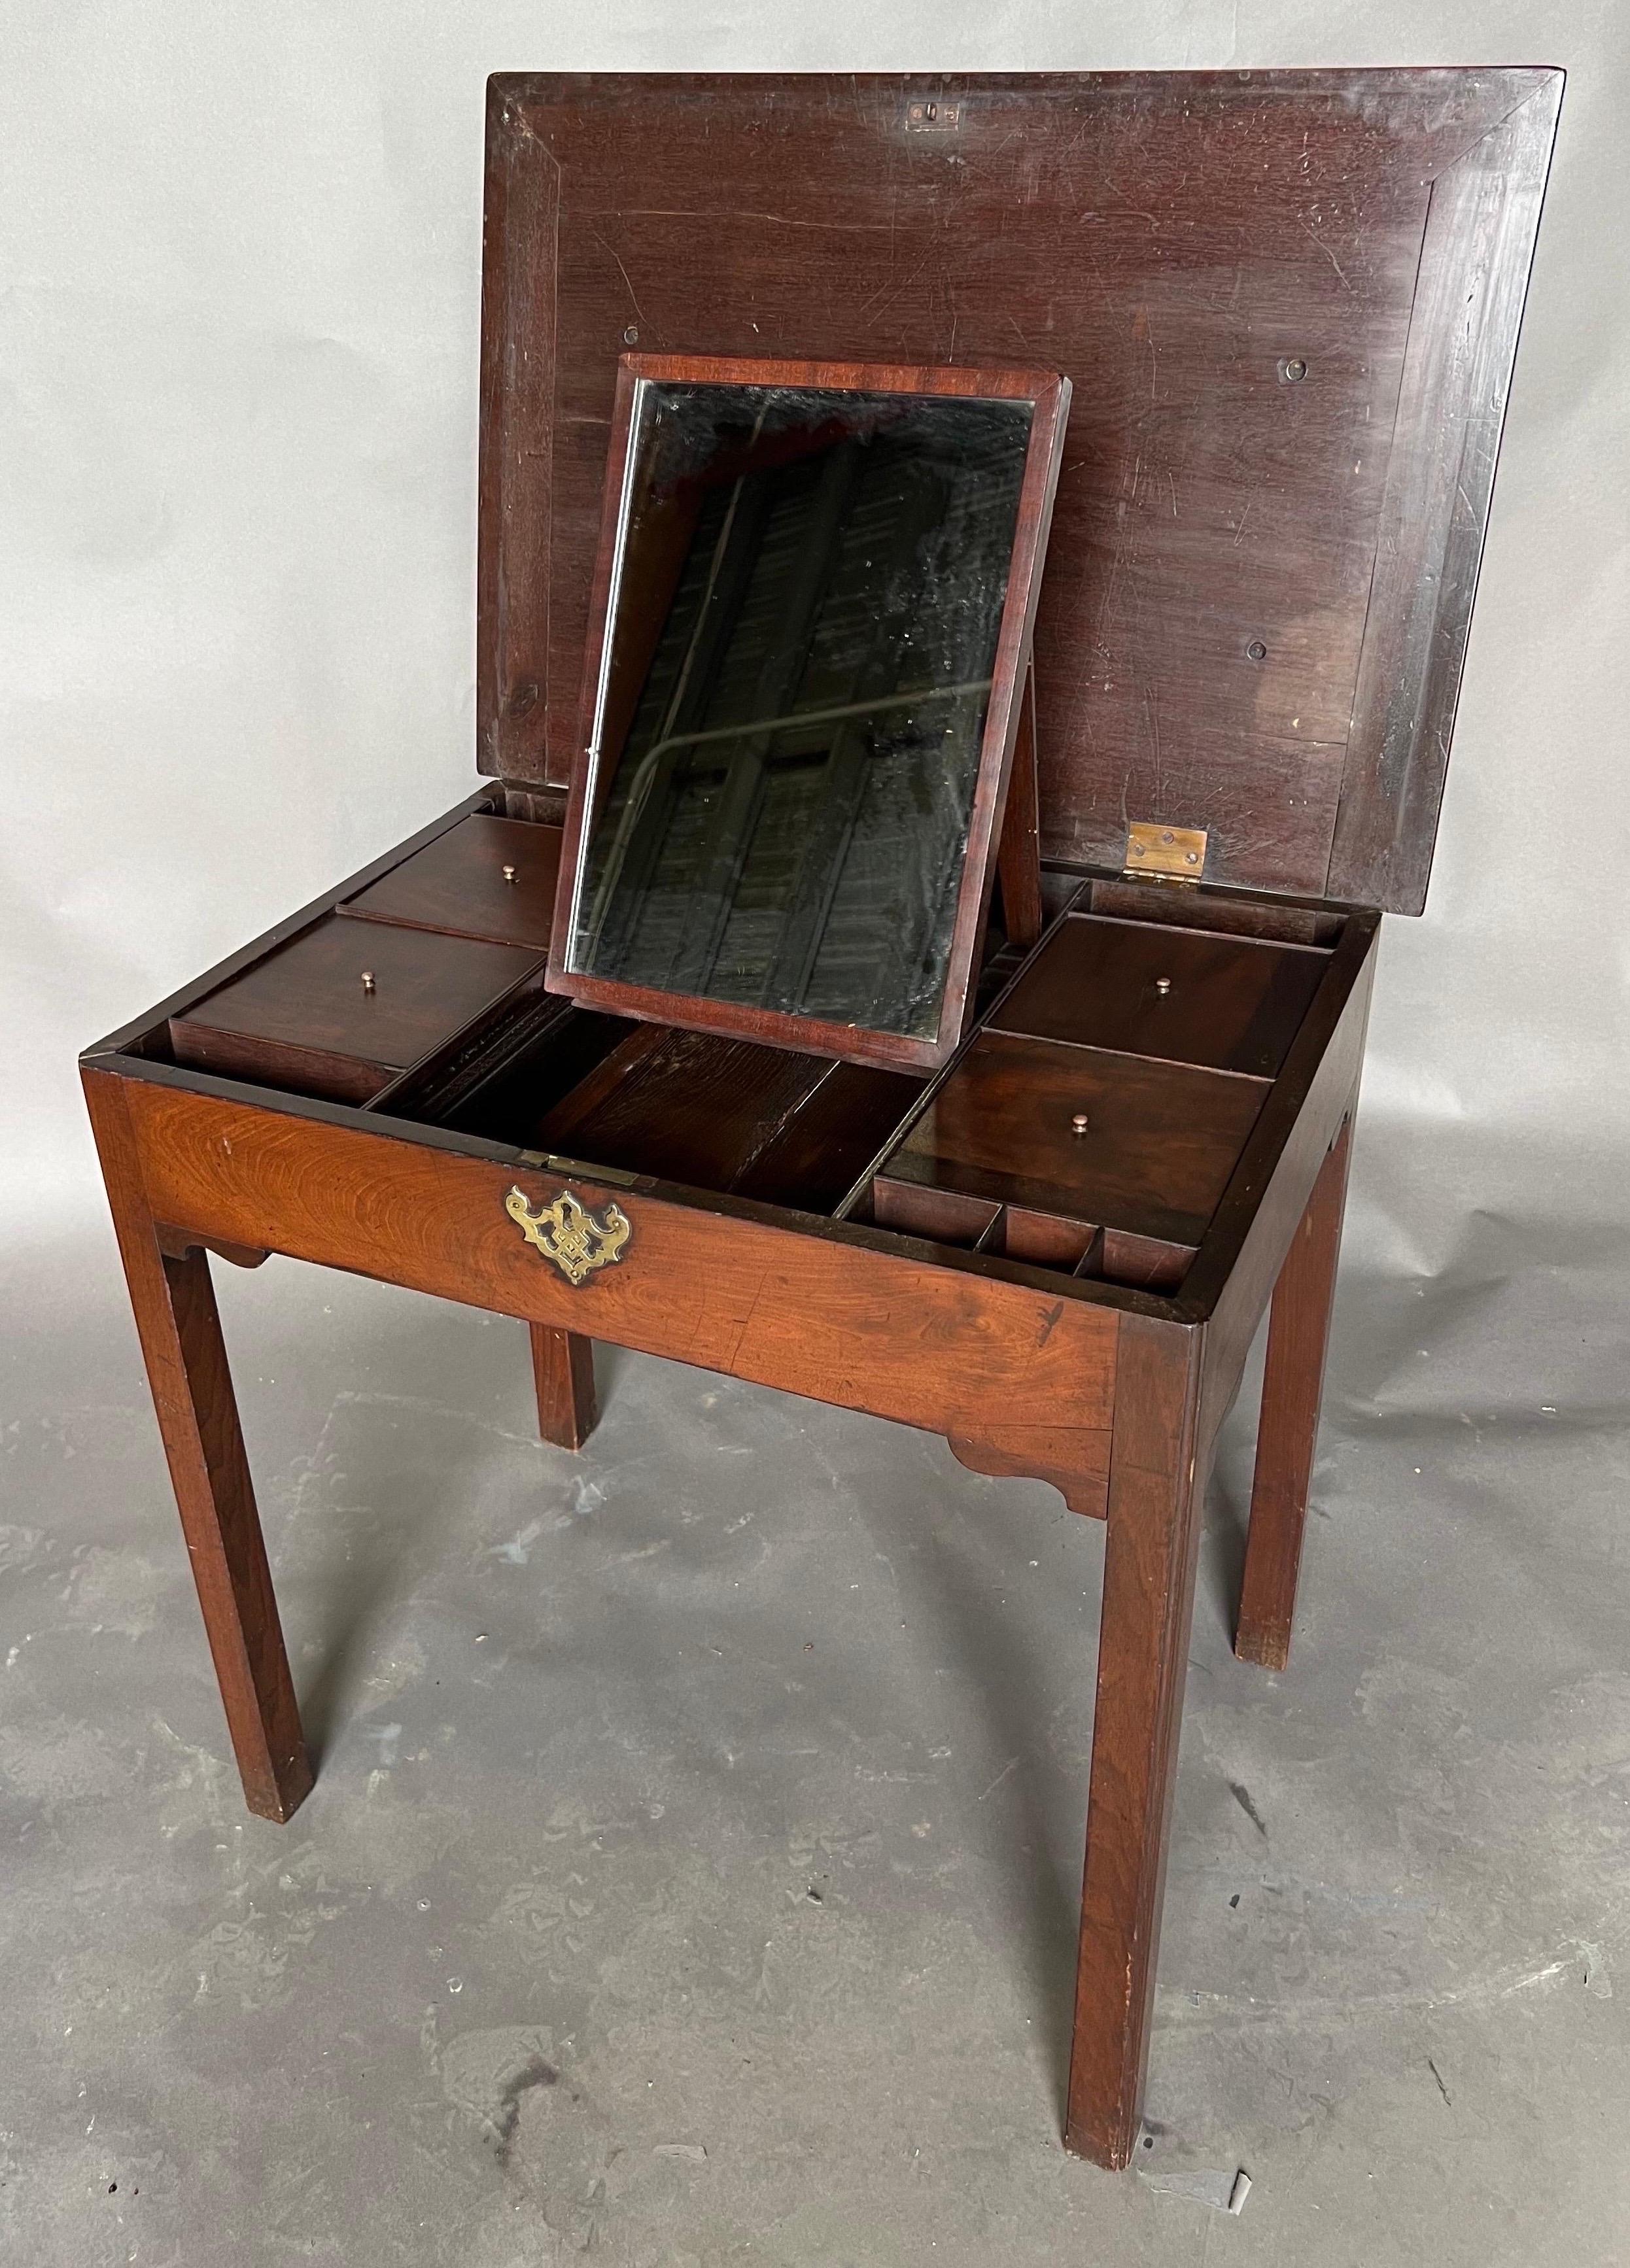 Fine 18th Century Georgian mahogany dressing table with lift top and sliding mirror and removable compartments. Dating from the mid 18th century, this piece is a fine example of the 